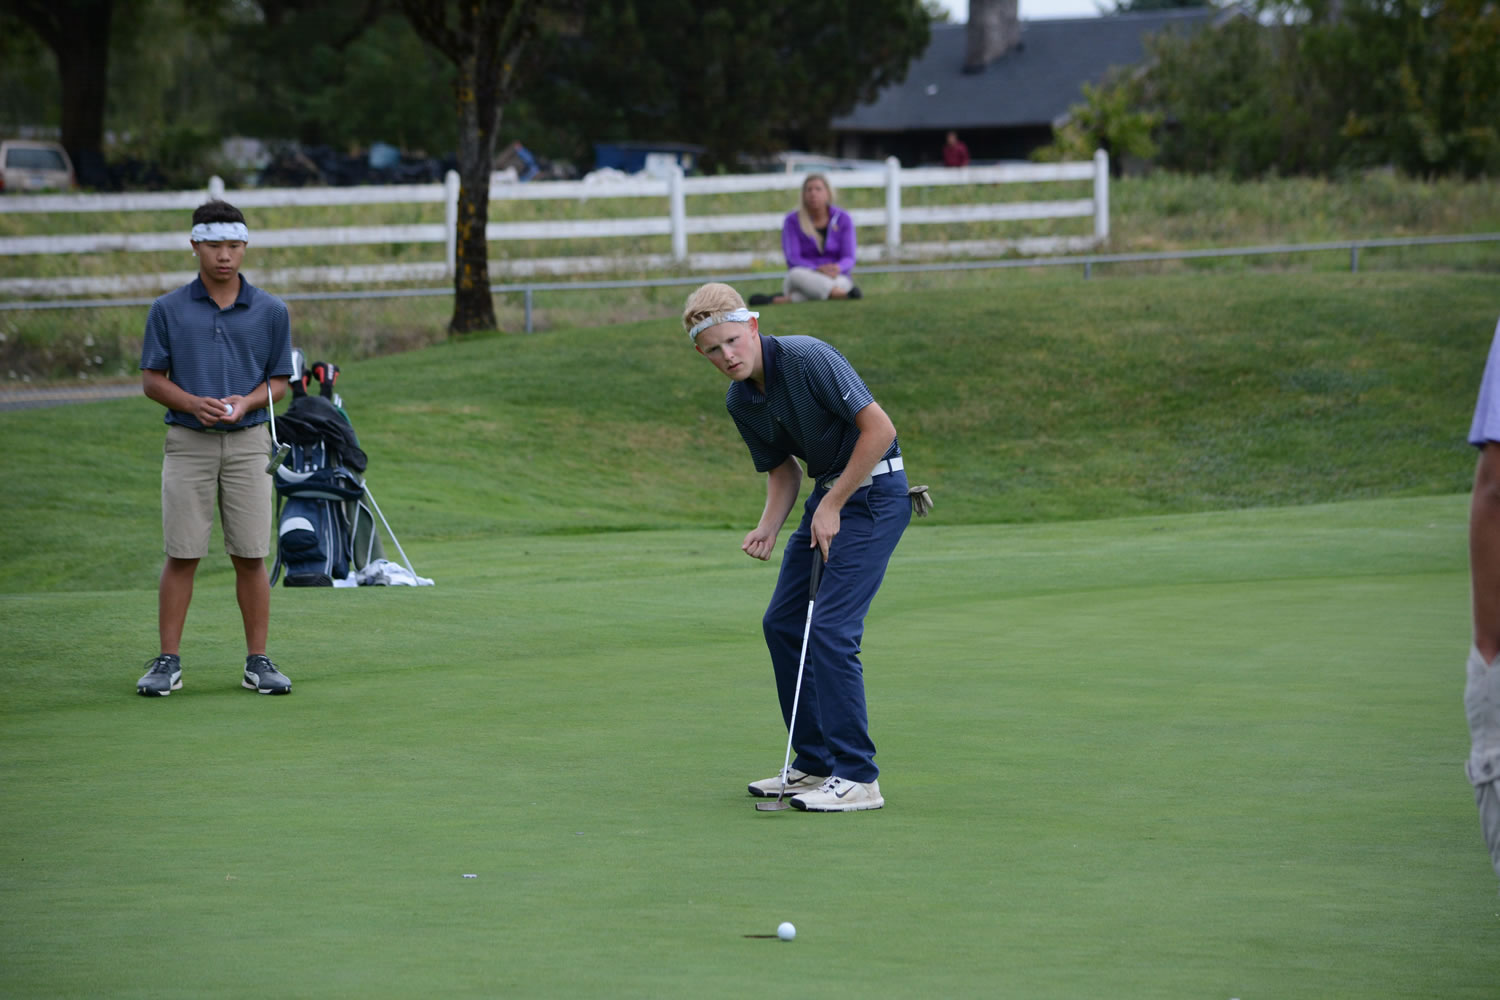 Skyview's Jackson Guffey narrowly misses a birdie putt on the ninth hole Tuesday at Tri-Mountain Golf Course.